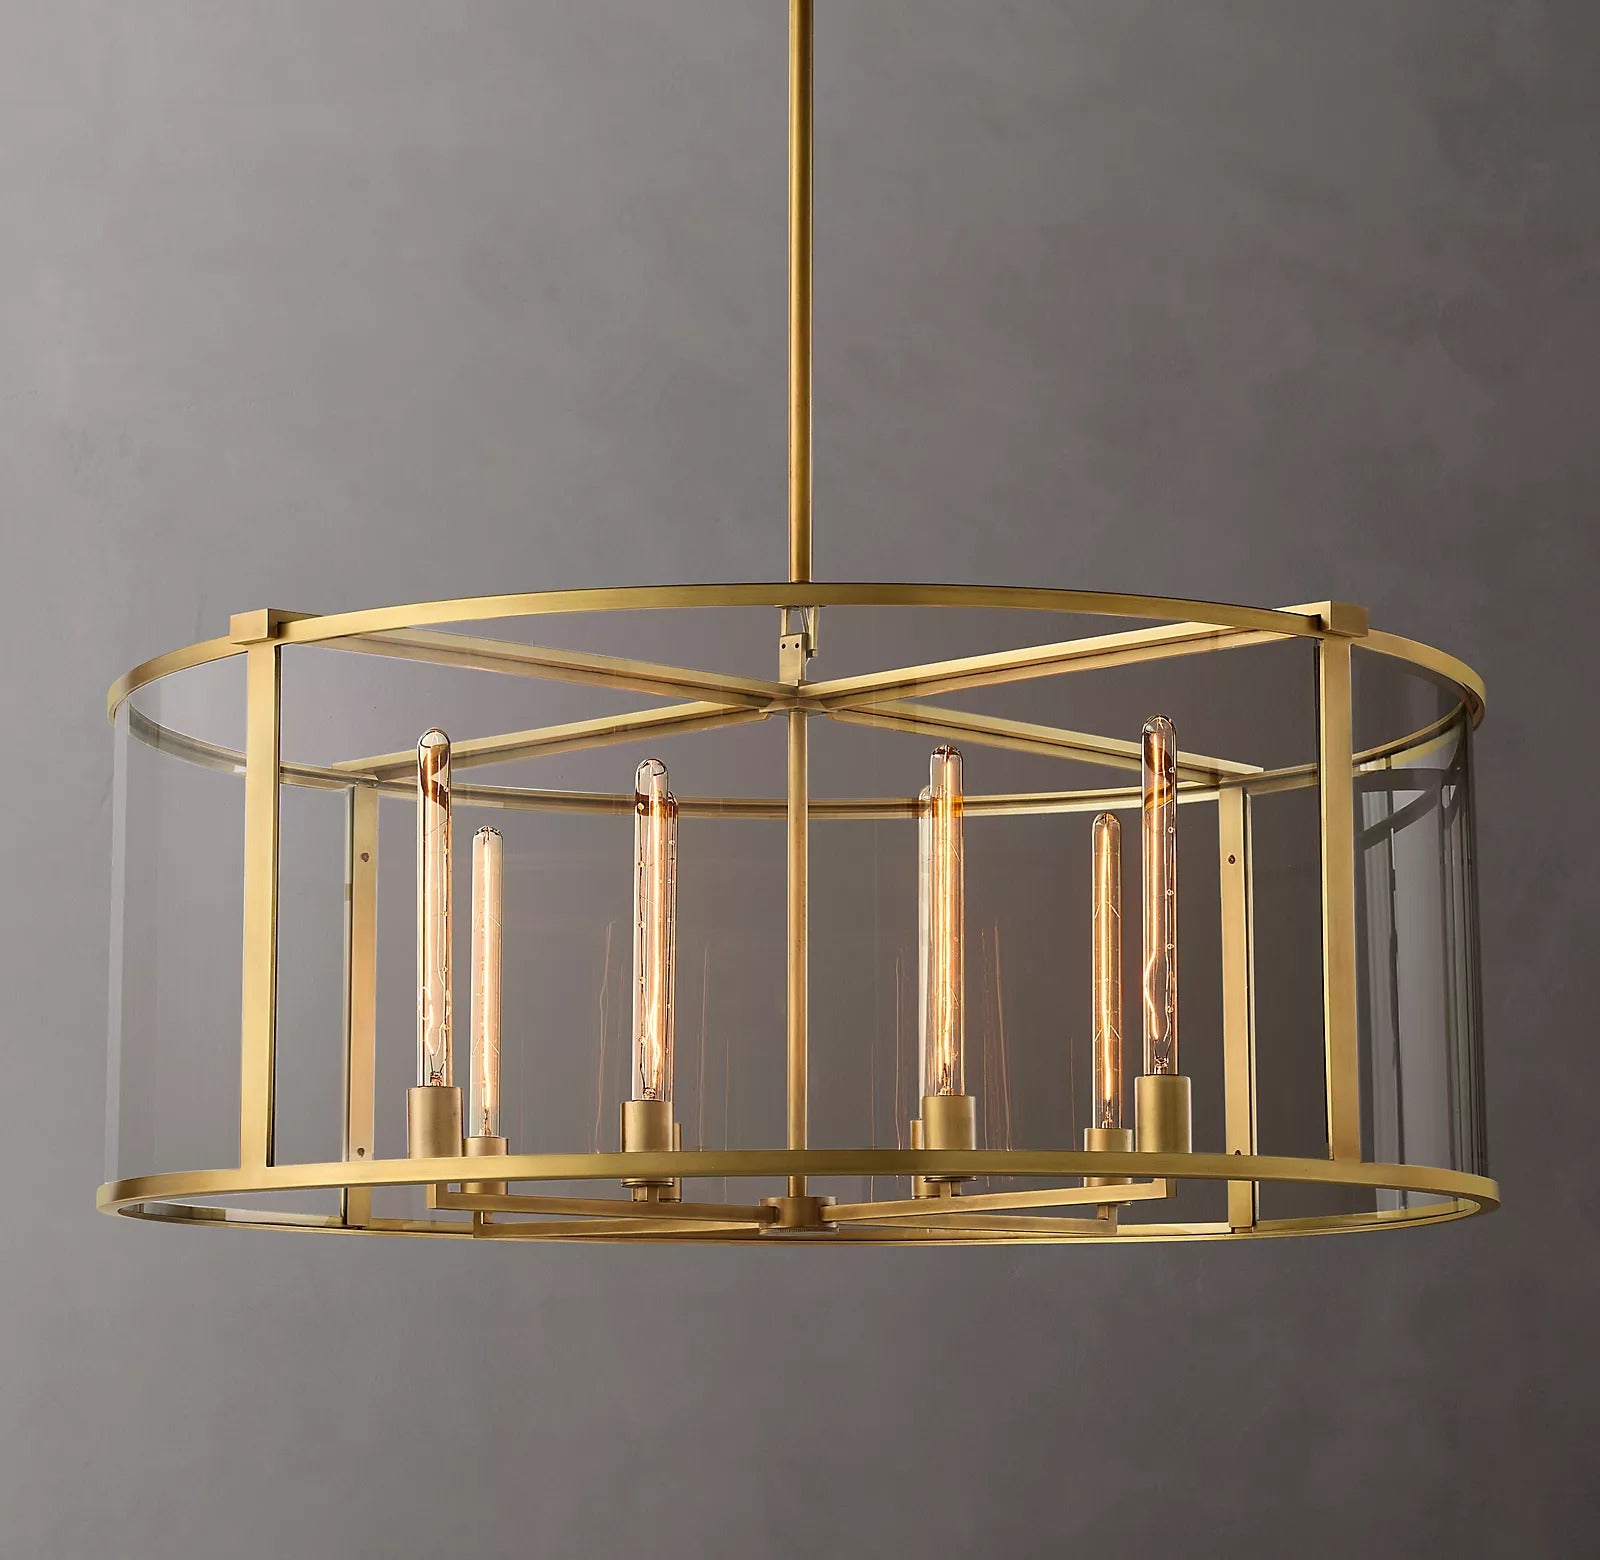 Michael Beck Round Chandelier 44" For Living Room-alimialighting